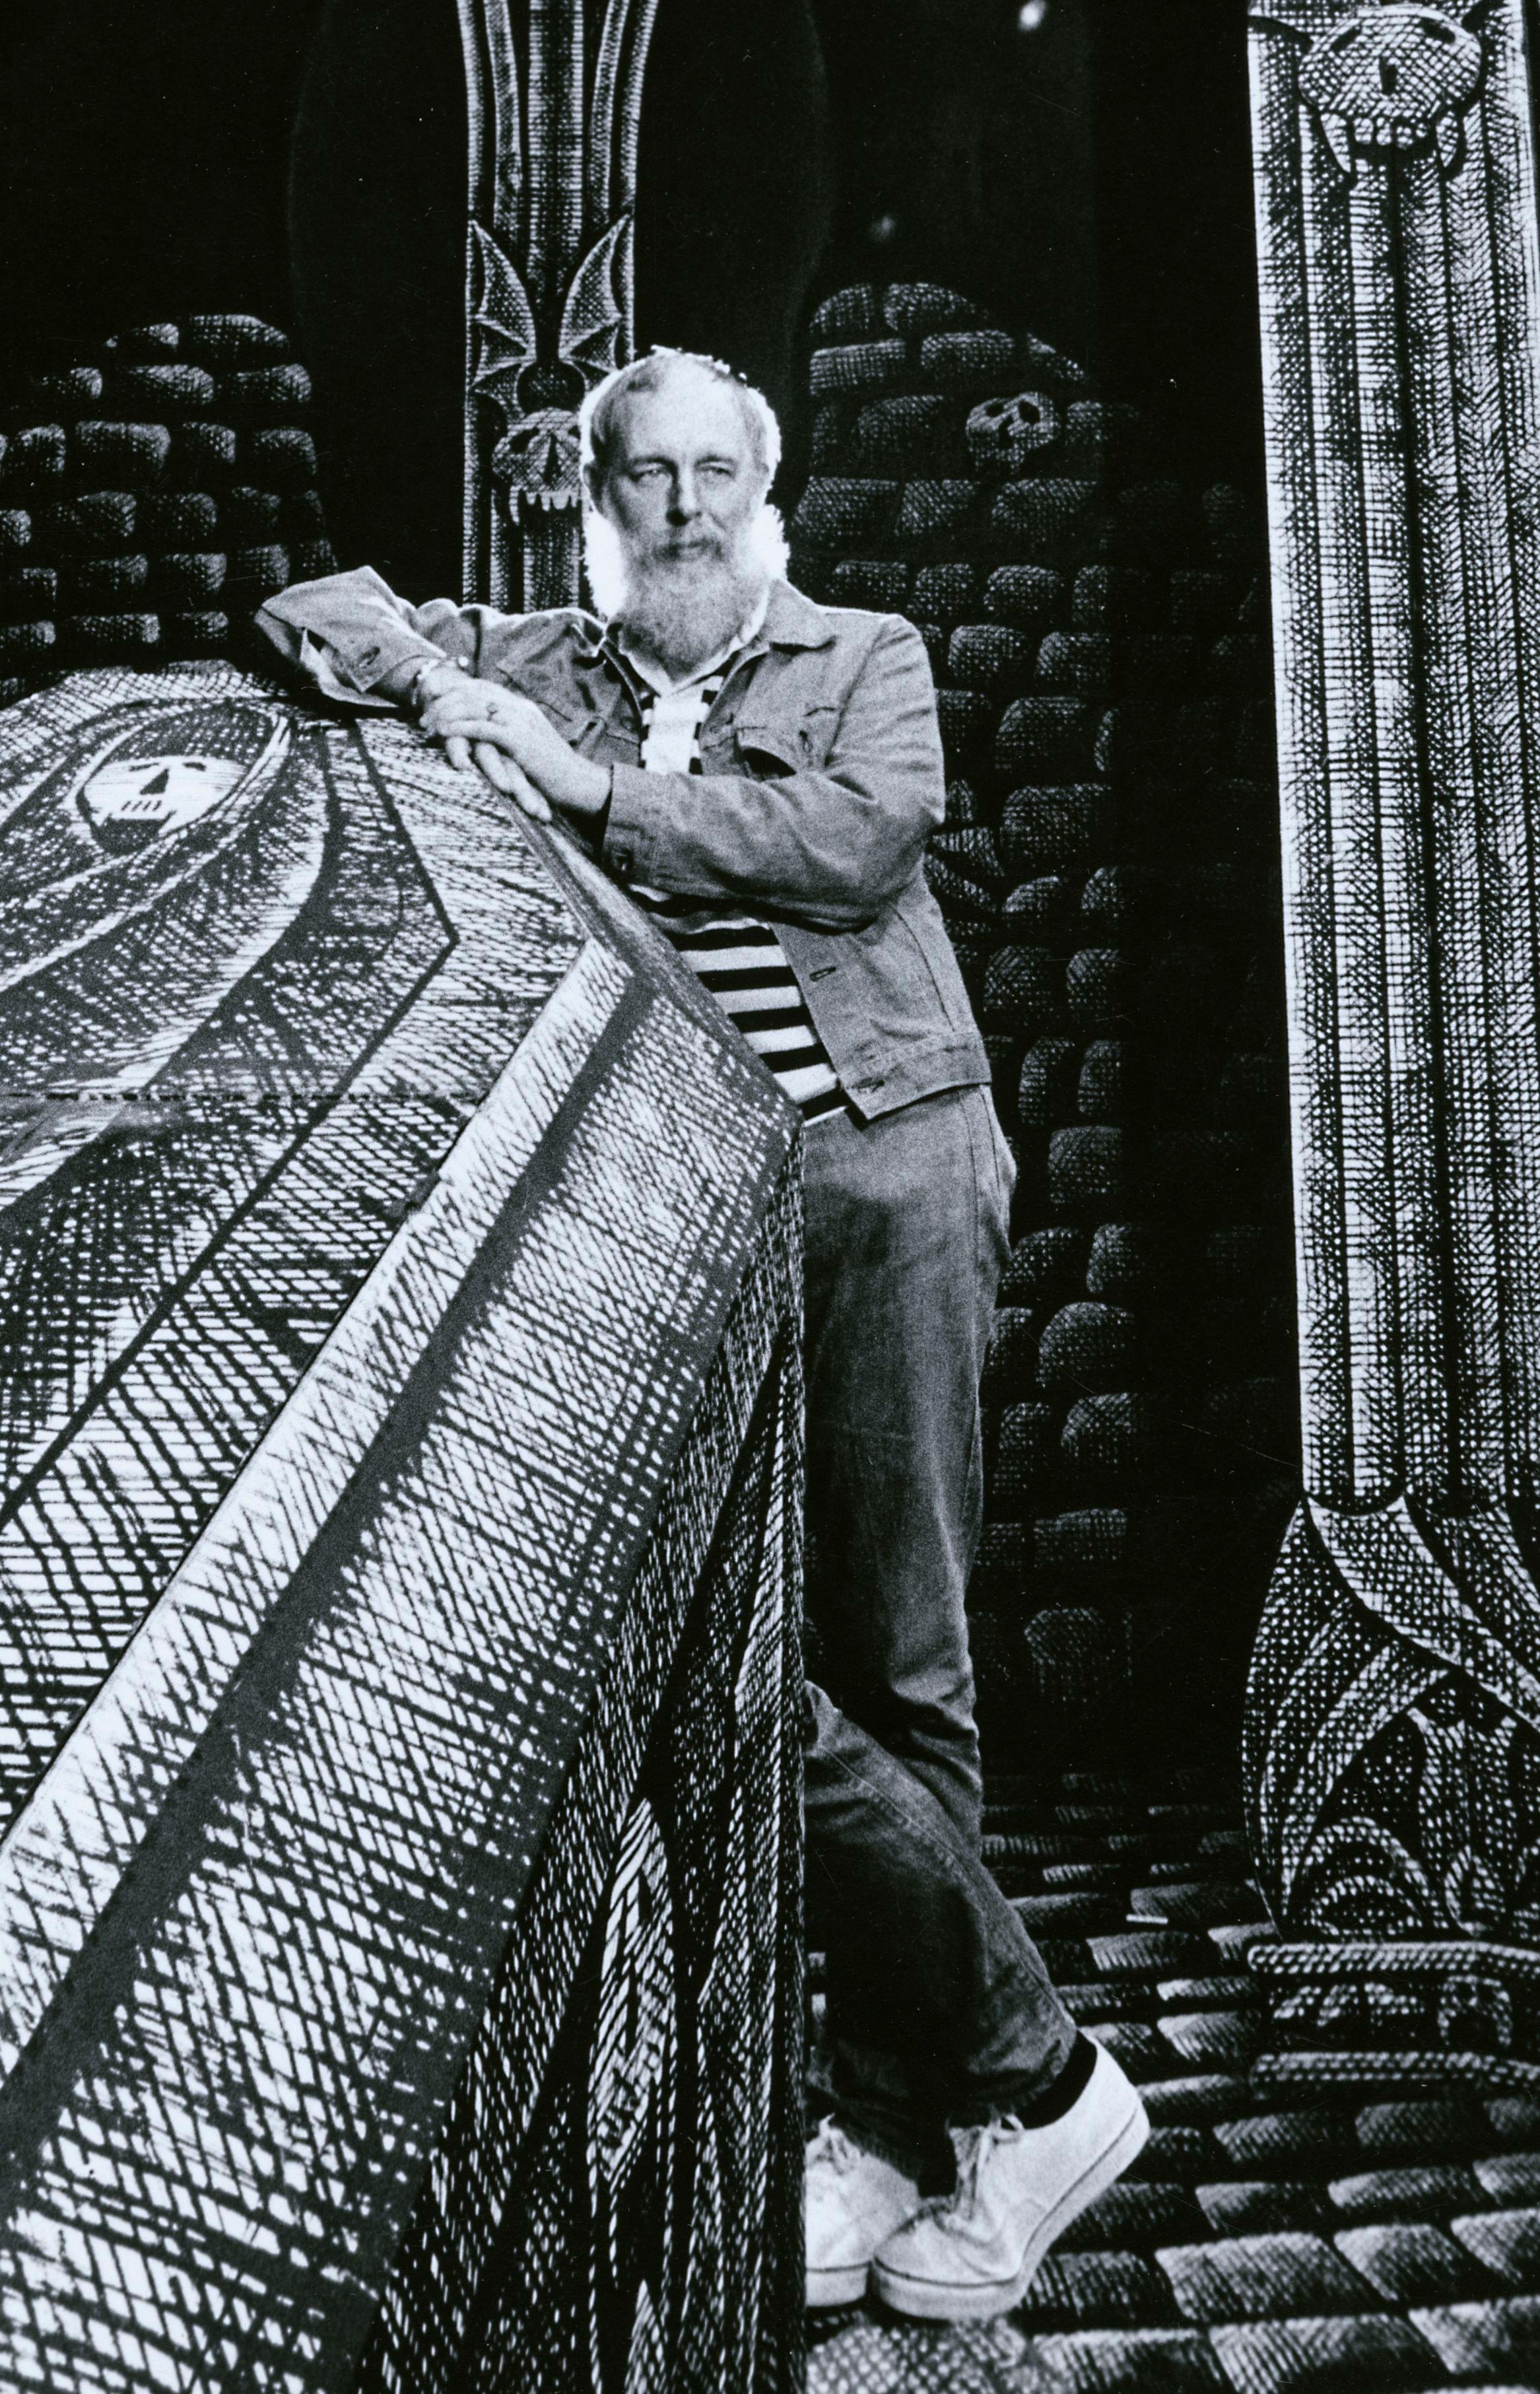  Artist/Writer Edward Gorey on the Broadway set he designed for 'Dracula' - Photograph by Jack Mitchell